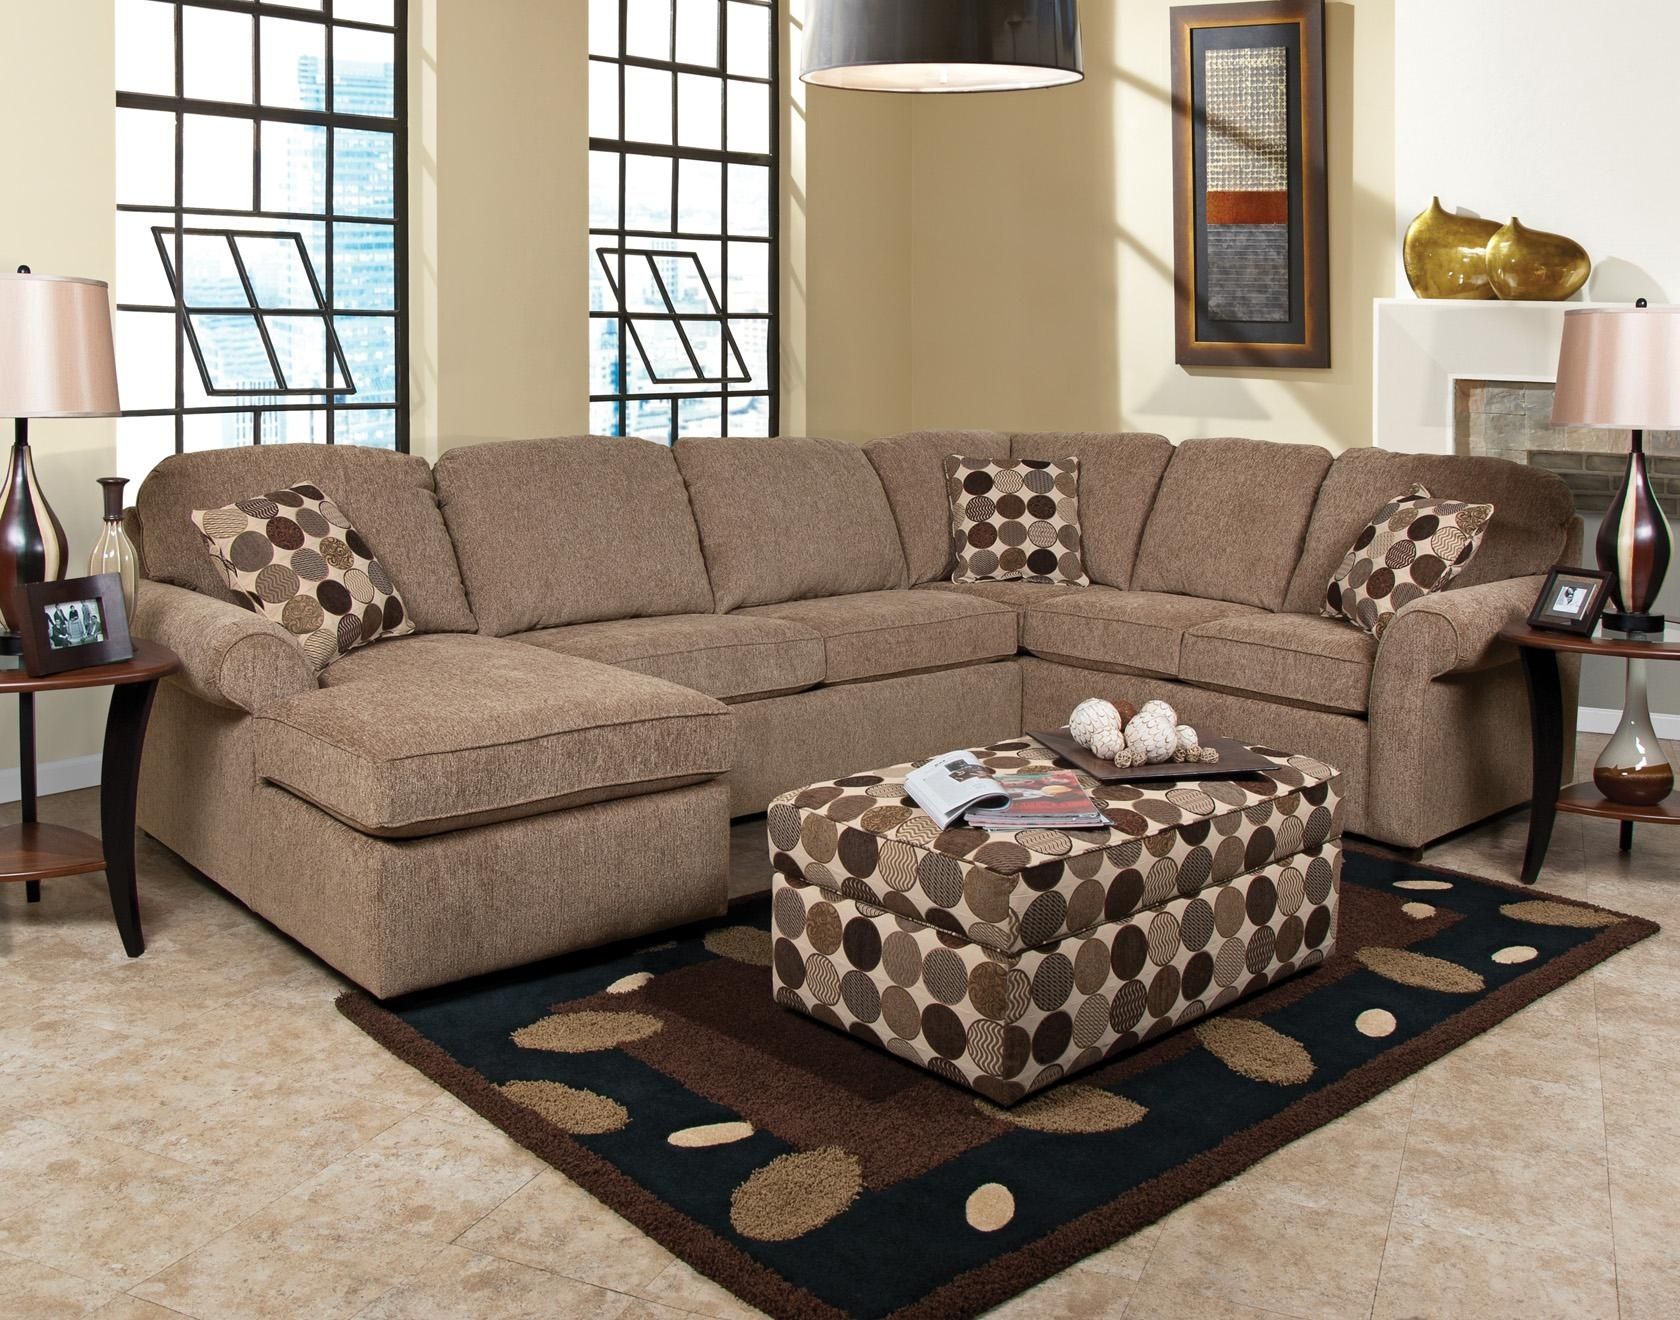 England Malibu 5 6 Seat (right Side) Chaise Sectional Sofa Regarding England Sectional Sofas (View 3 of 10)